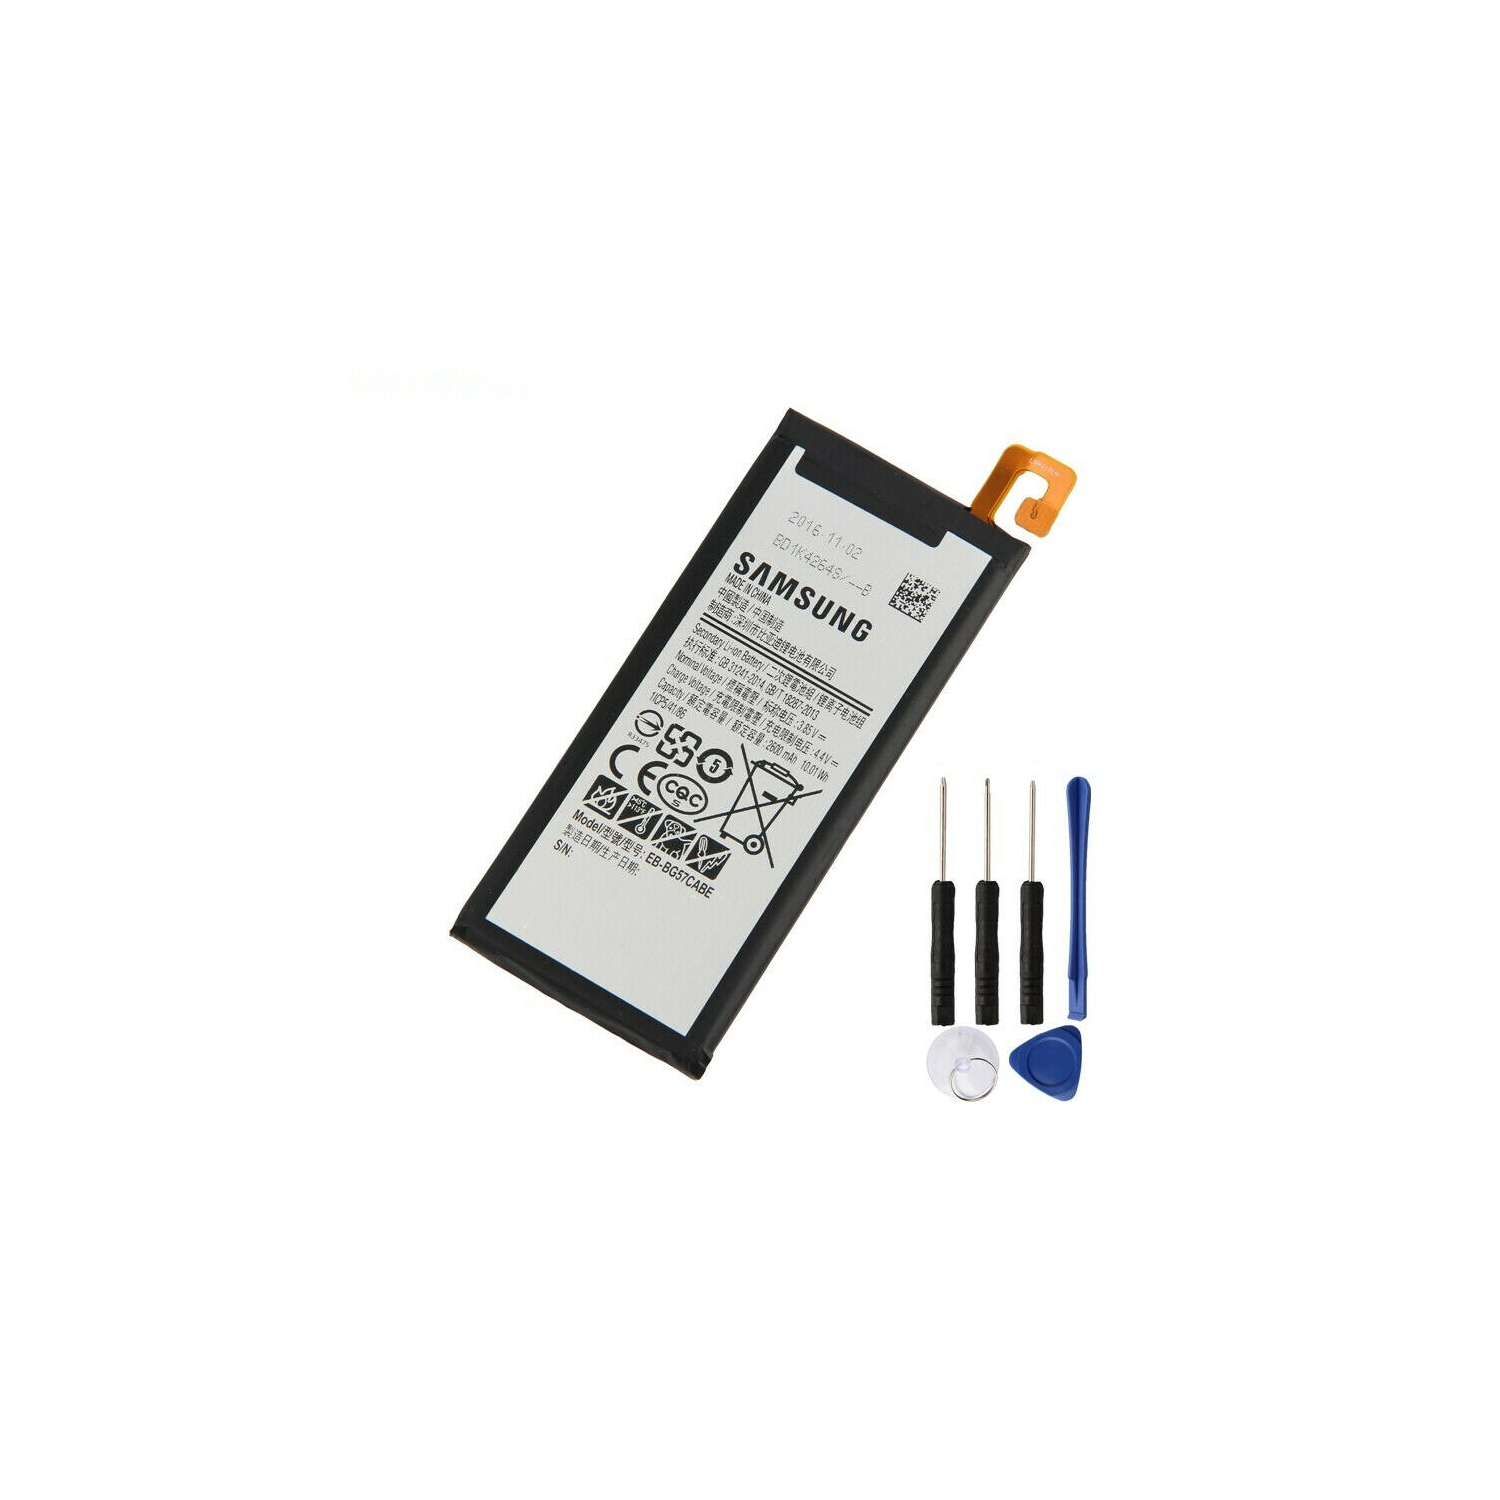 Replacement Battery for Samsung Galaxy J5 Prime 2016 / On5 2016, SM-G570M G5700 G5510, EB-BG570ABE